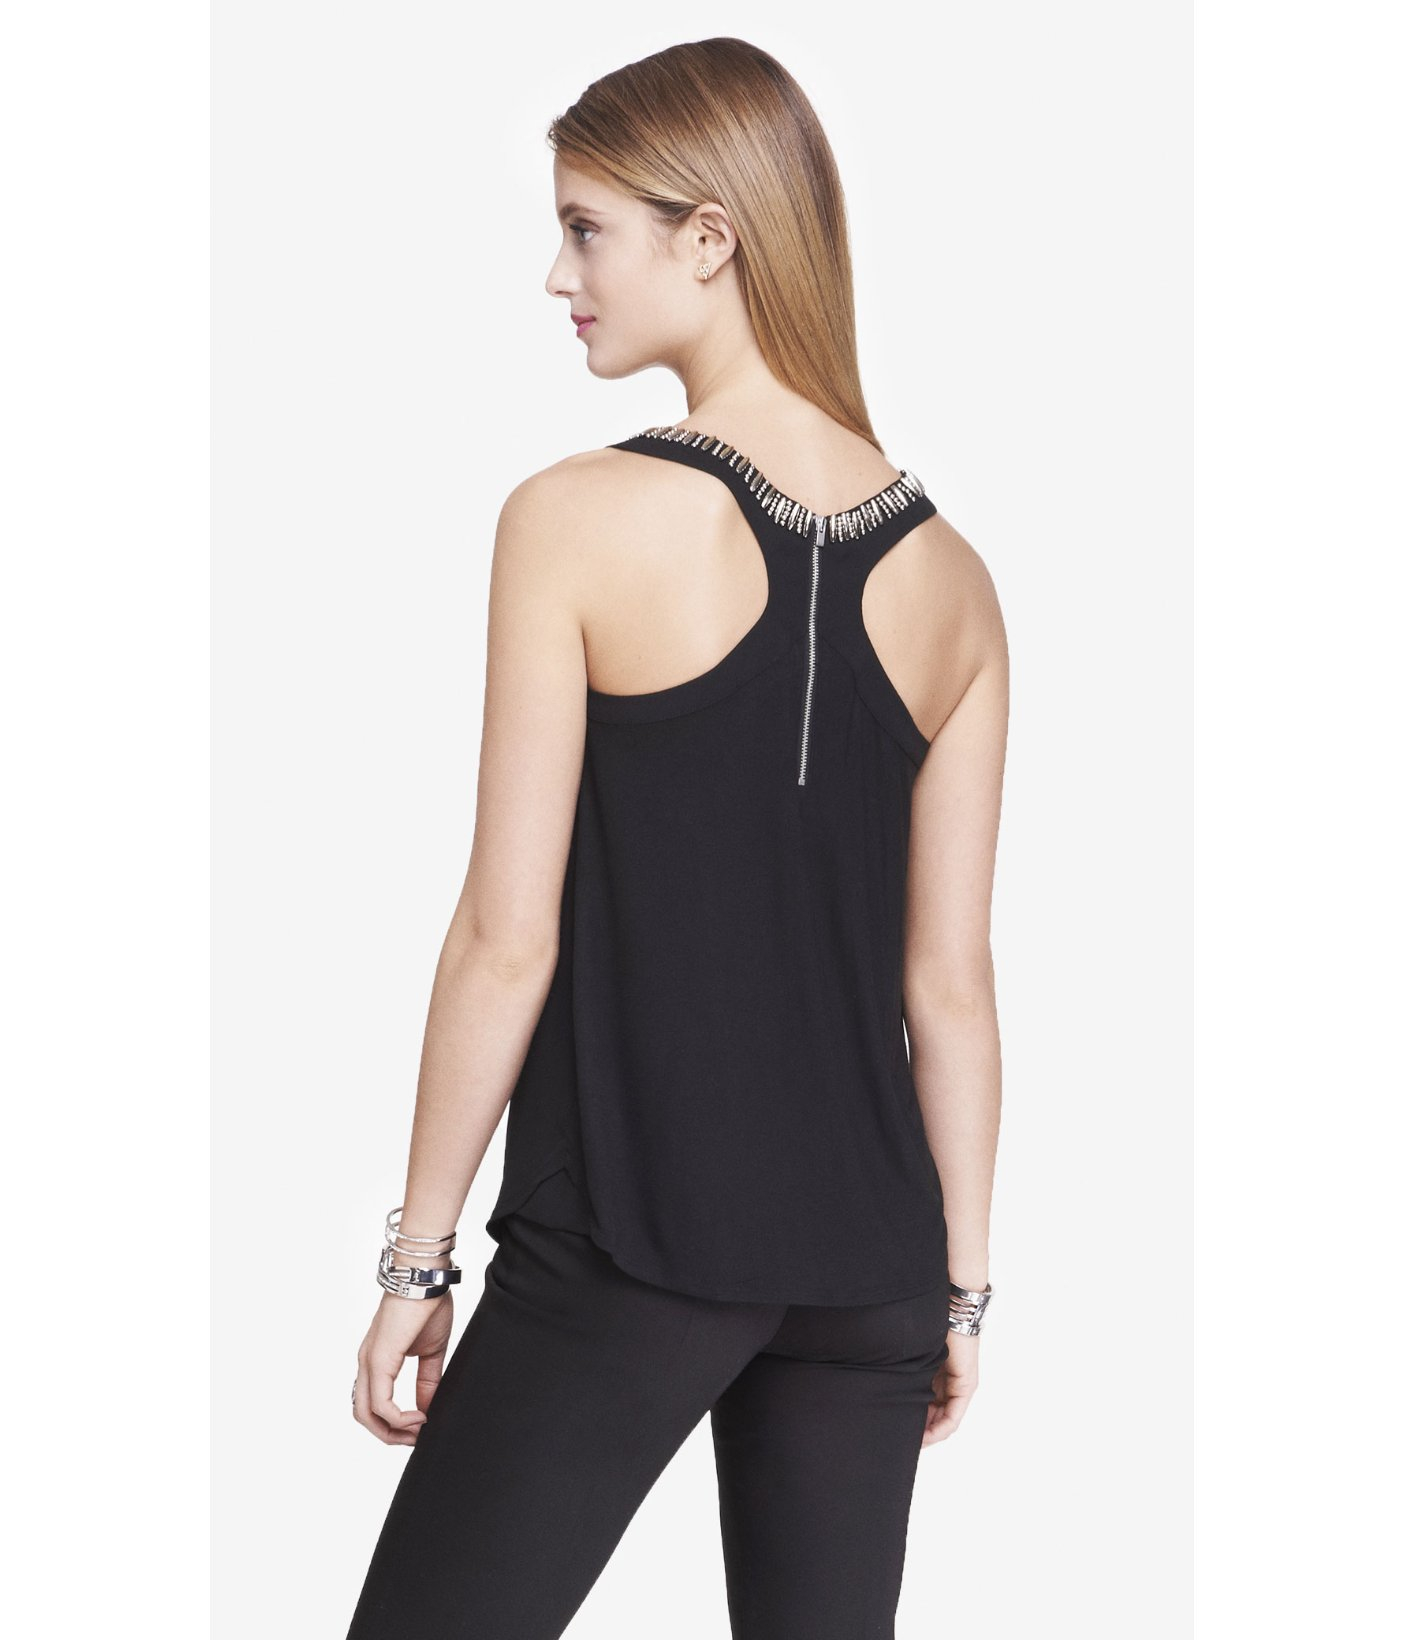 Subdued Orange and Black Tank Top for Women, Alanic Activewear